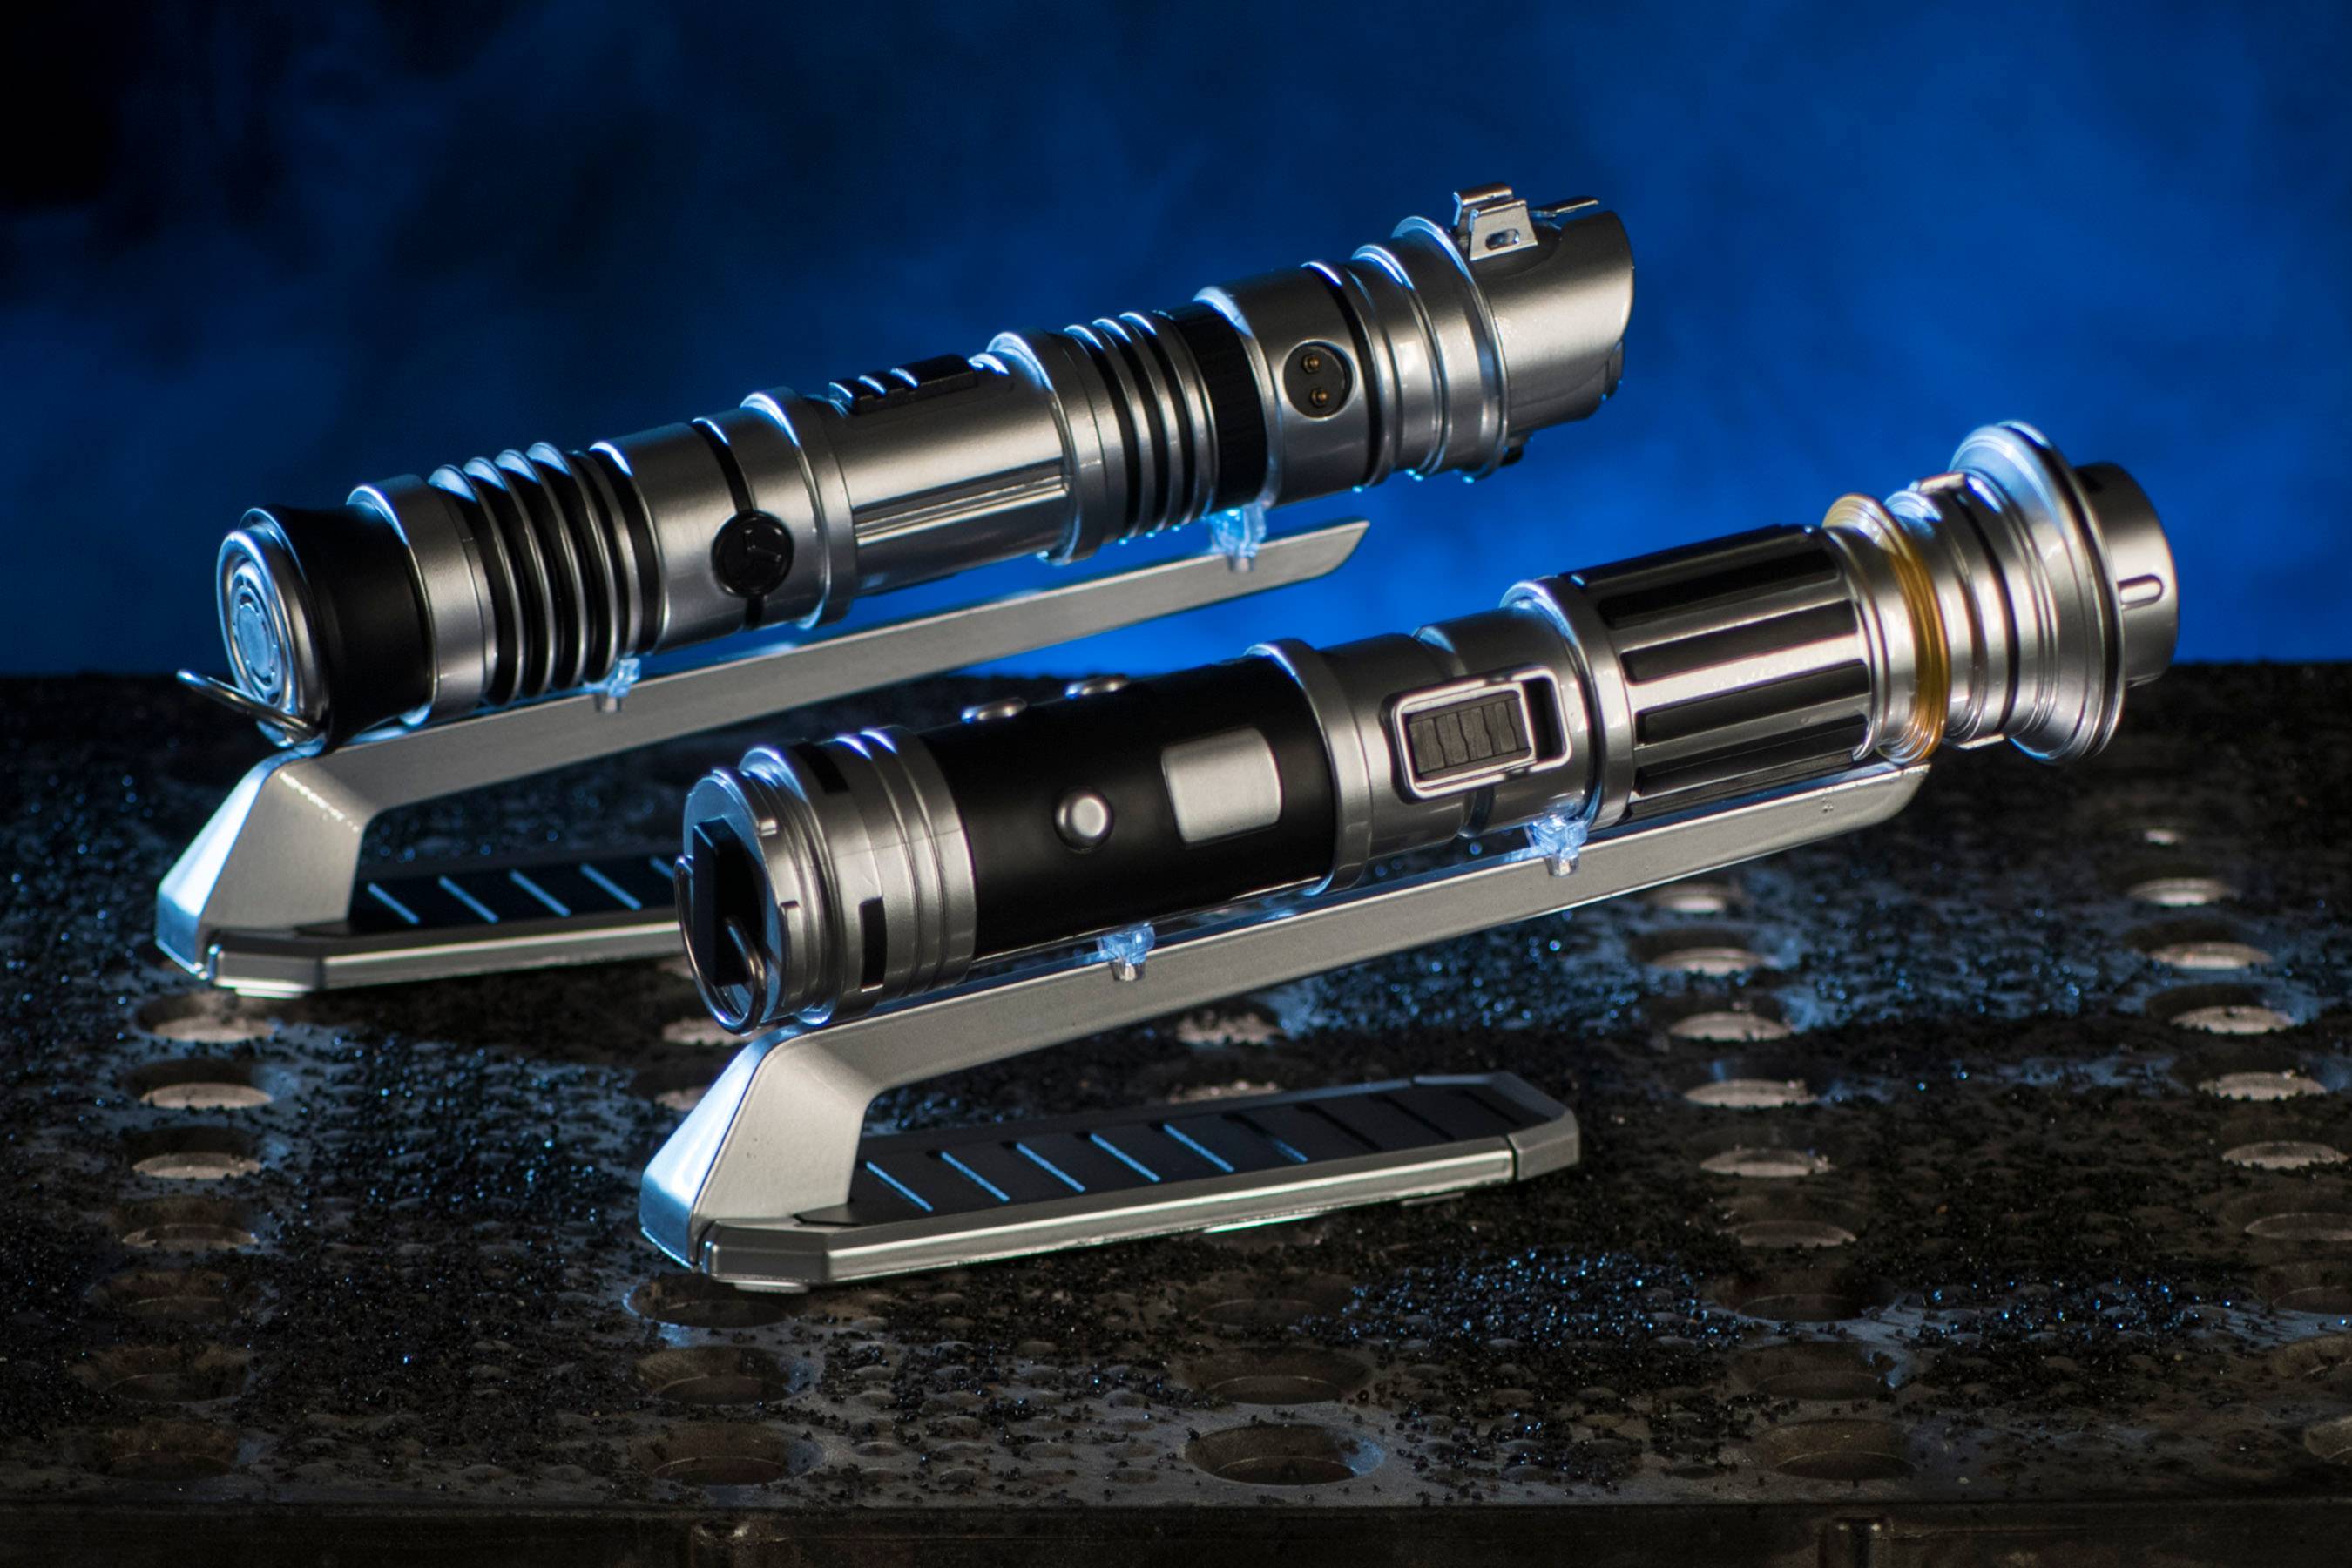 Savi's Workshop in Star Wars Galaxy's Edge modifies payment policy for lightsaber experience